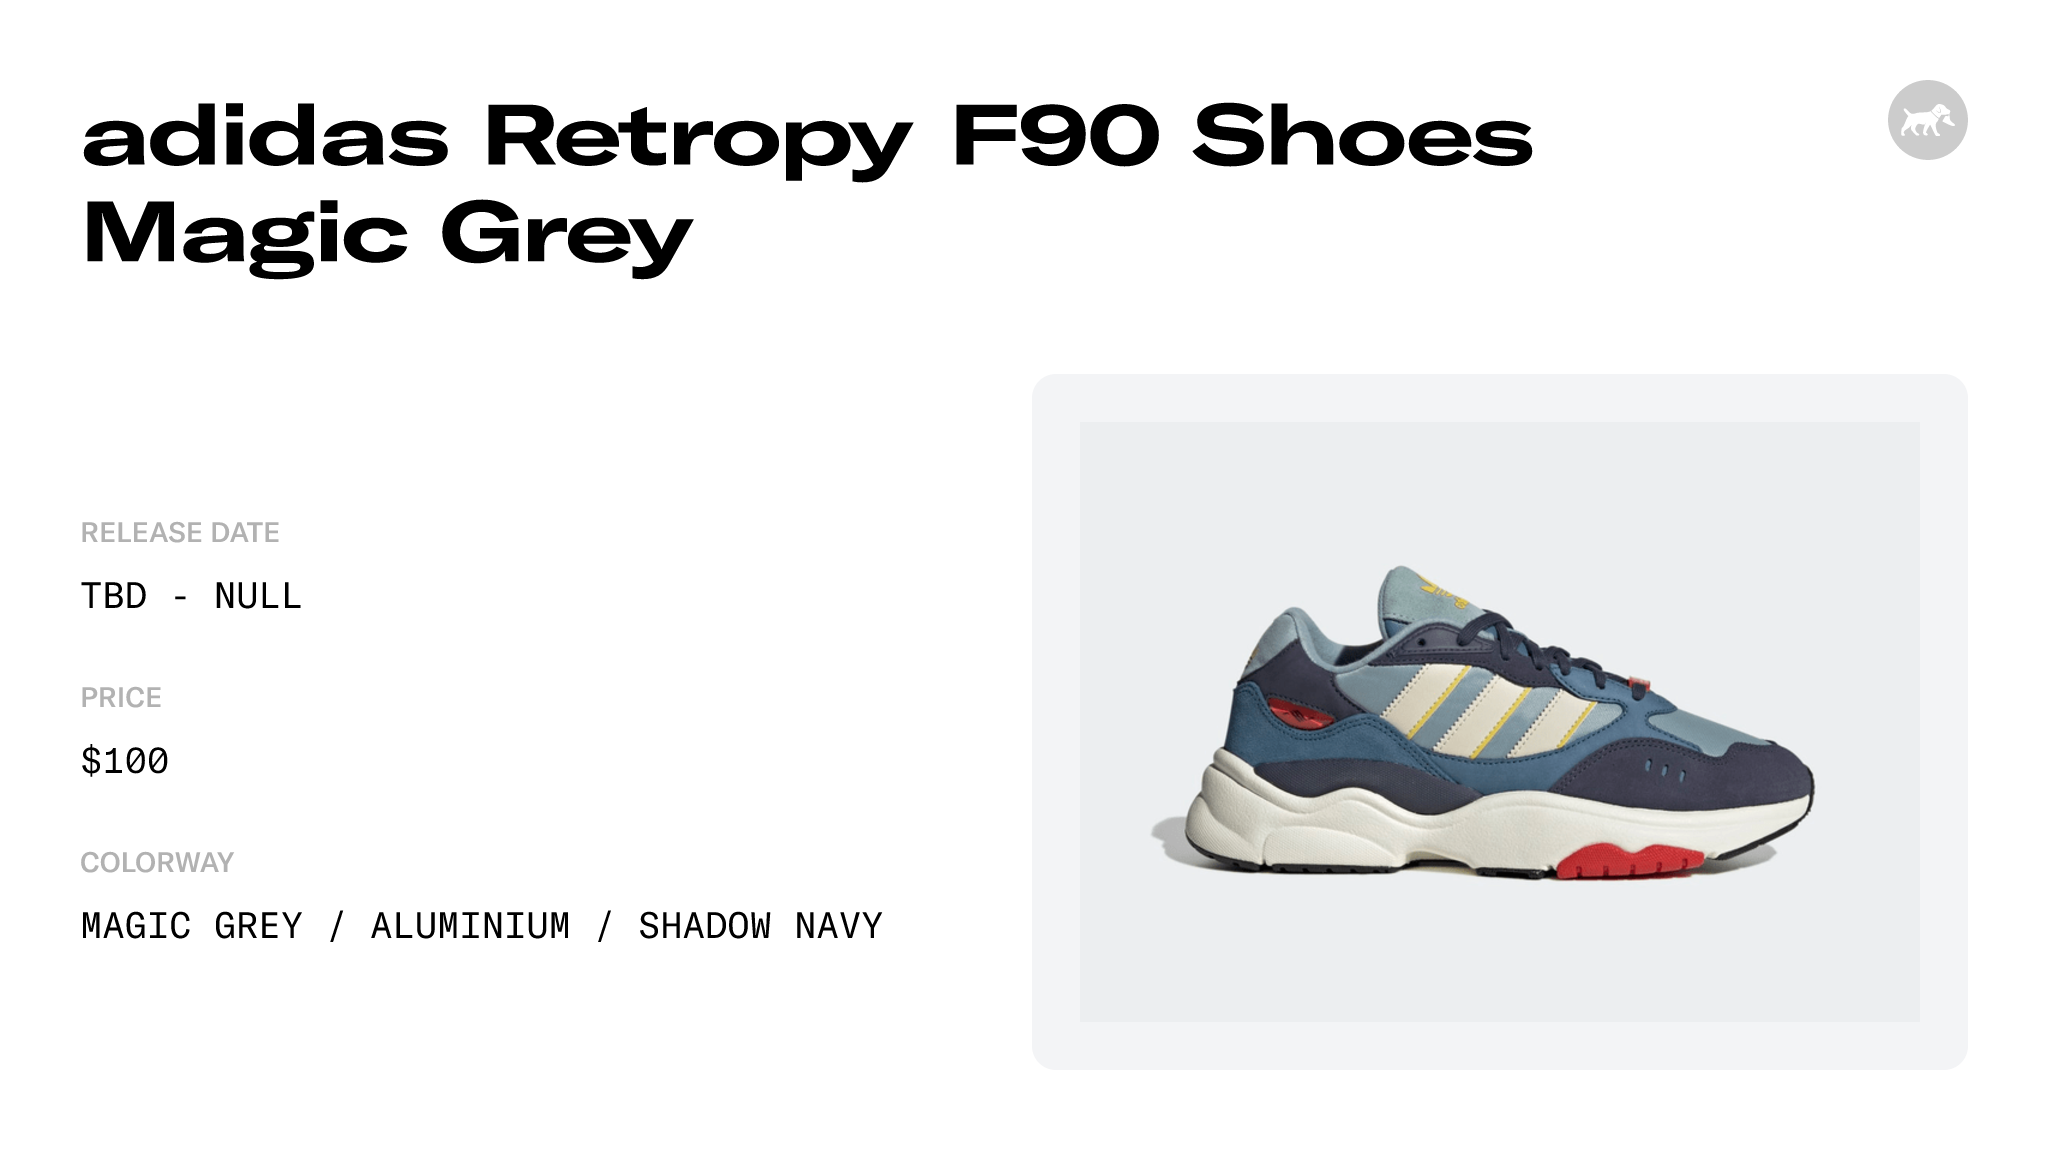 adidas Retropy F90 Shoes Magic Grey - HP8030 Raffles and Release Date